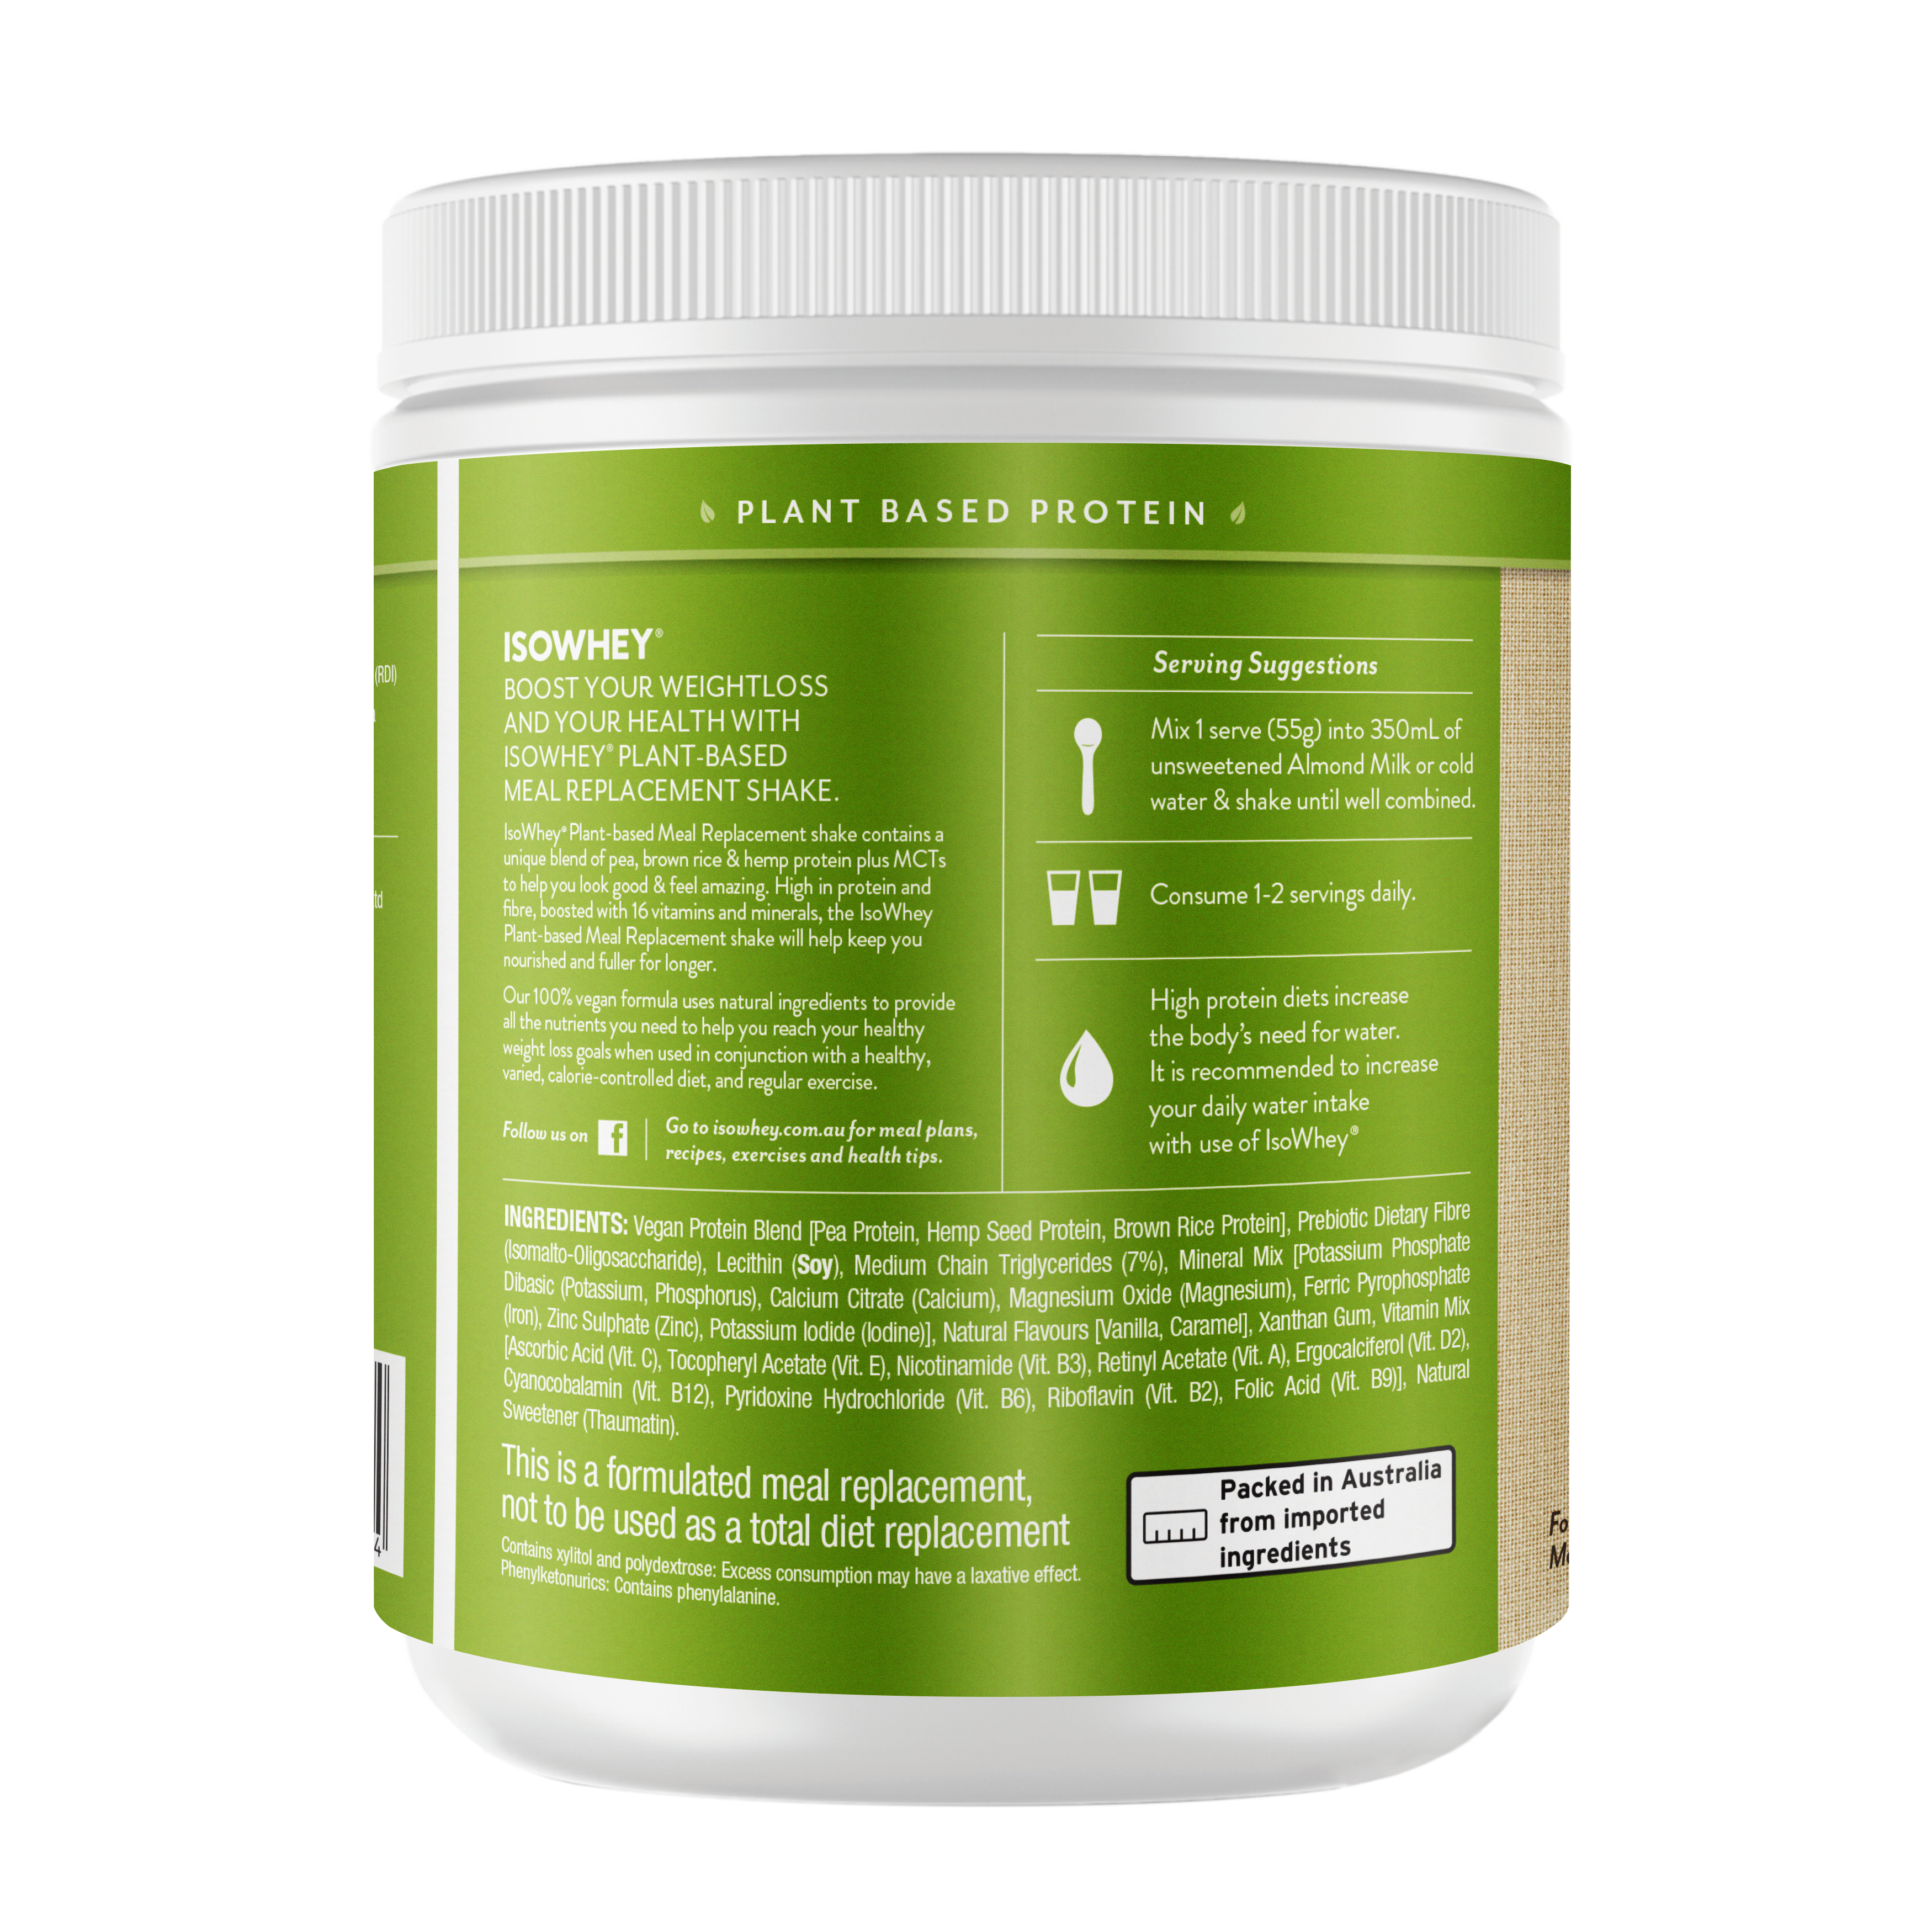 IsoWhey Plant-Based Meal Replacement Vanilla Shake 550g backshot, showing its ingredients and servicing size